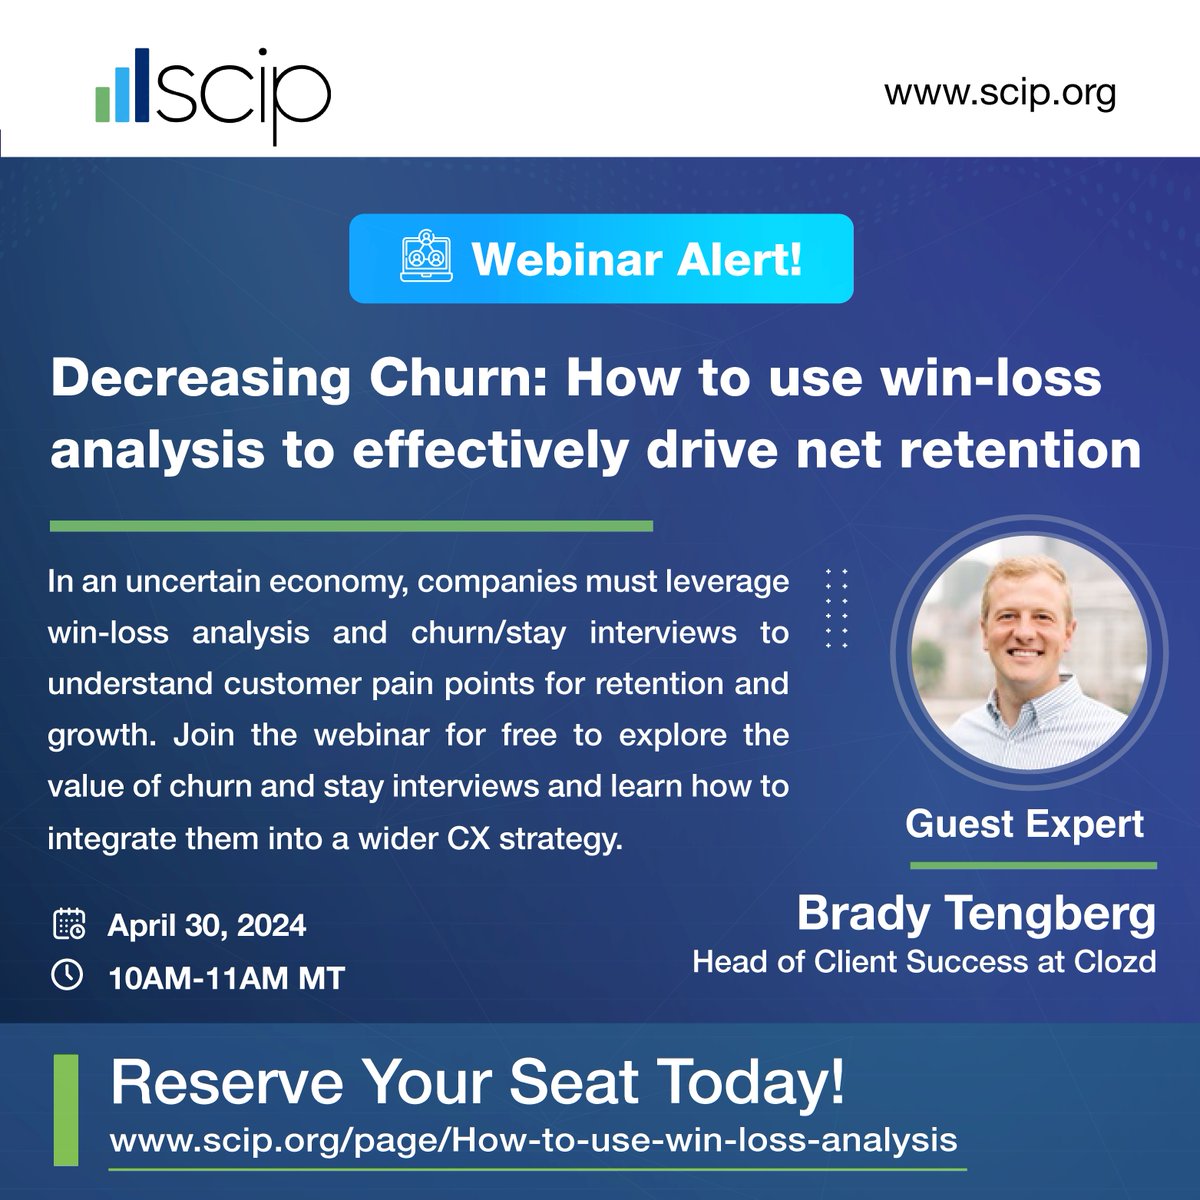 Register for Free: hubs.la/Q02vcTnj0 Uncertain times call for smarter strategies. Join our free webinar to #discover how win-loss analysis, combined with churn/stay interviews, unlocks the secrets to retaining your customers and fueling #businessgrowth.